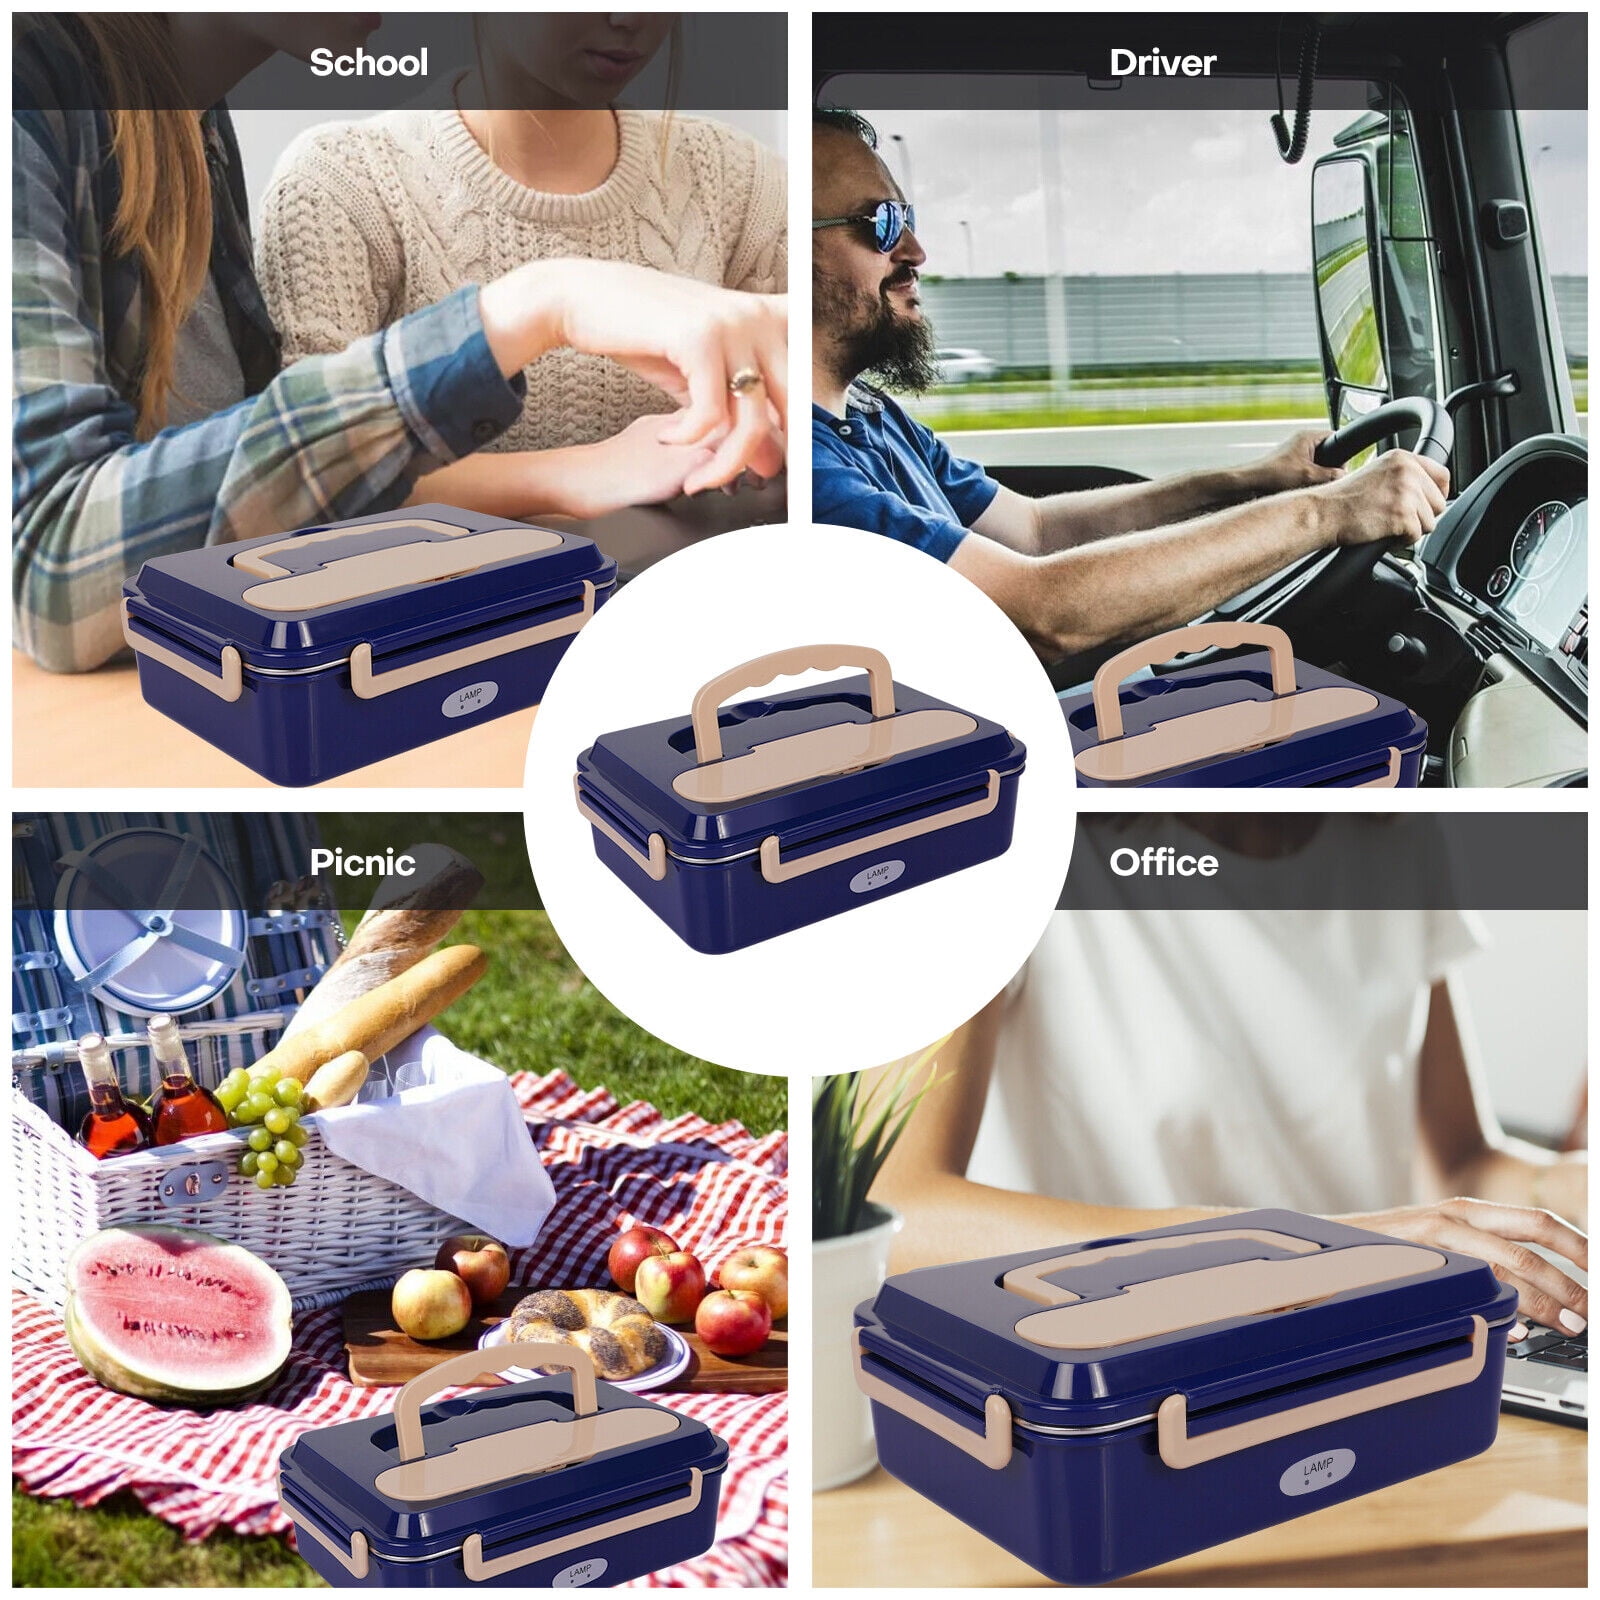 Electric Lunch Box, 3 in 1 Food Heater Portable Microwave Electric Lunch  Boxes with Insulation Bag f…See more Electric Lunch Box, 3 in 1 Food Heater